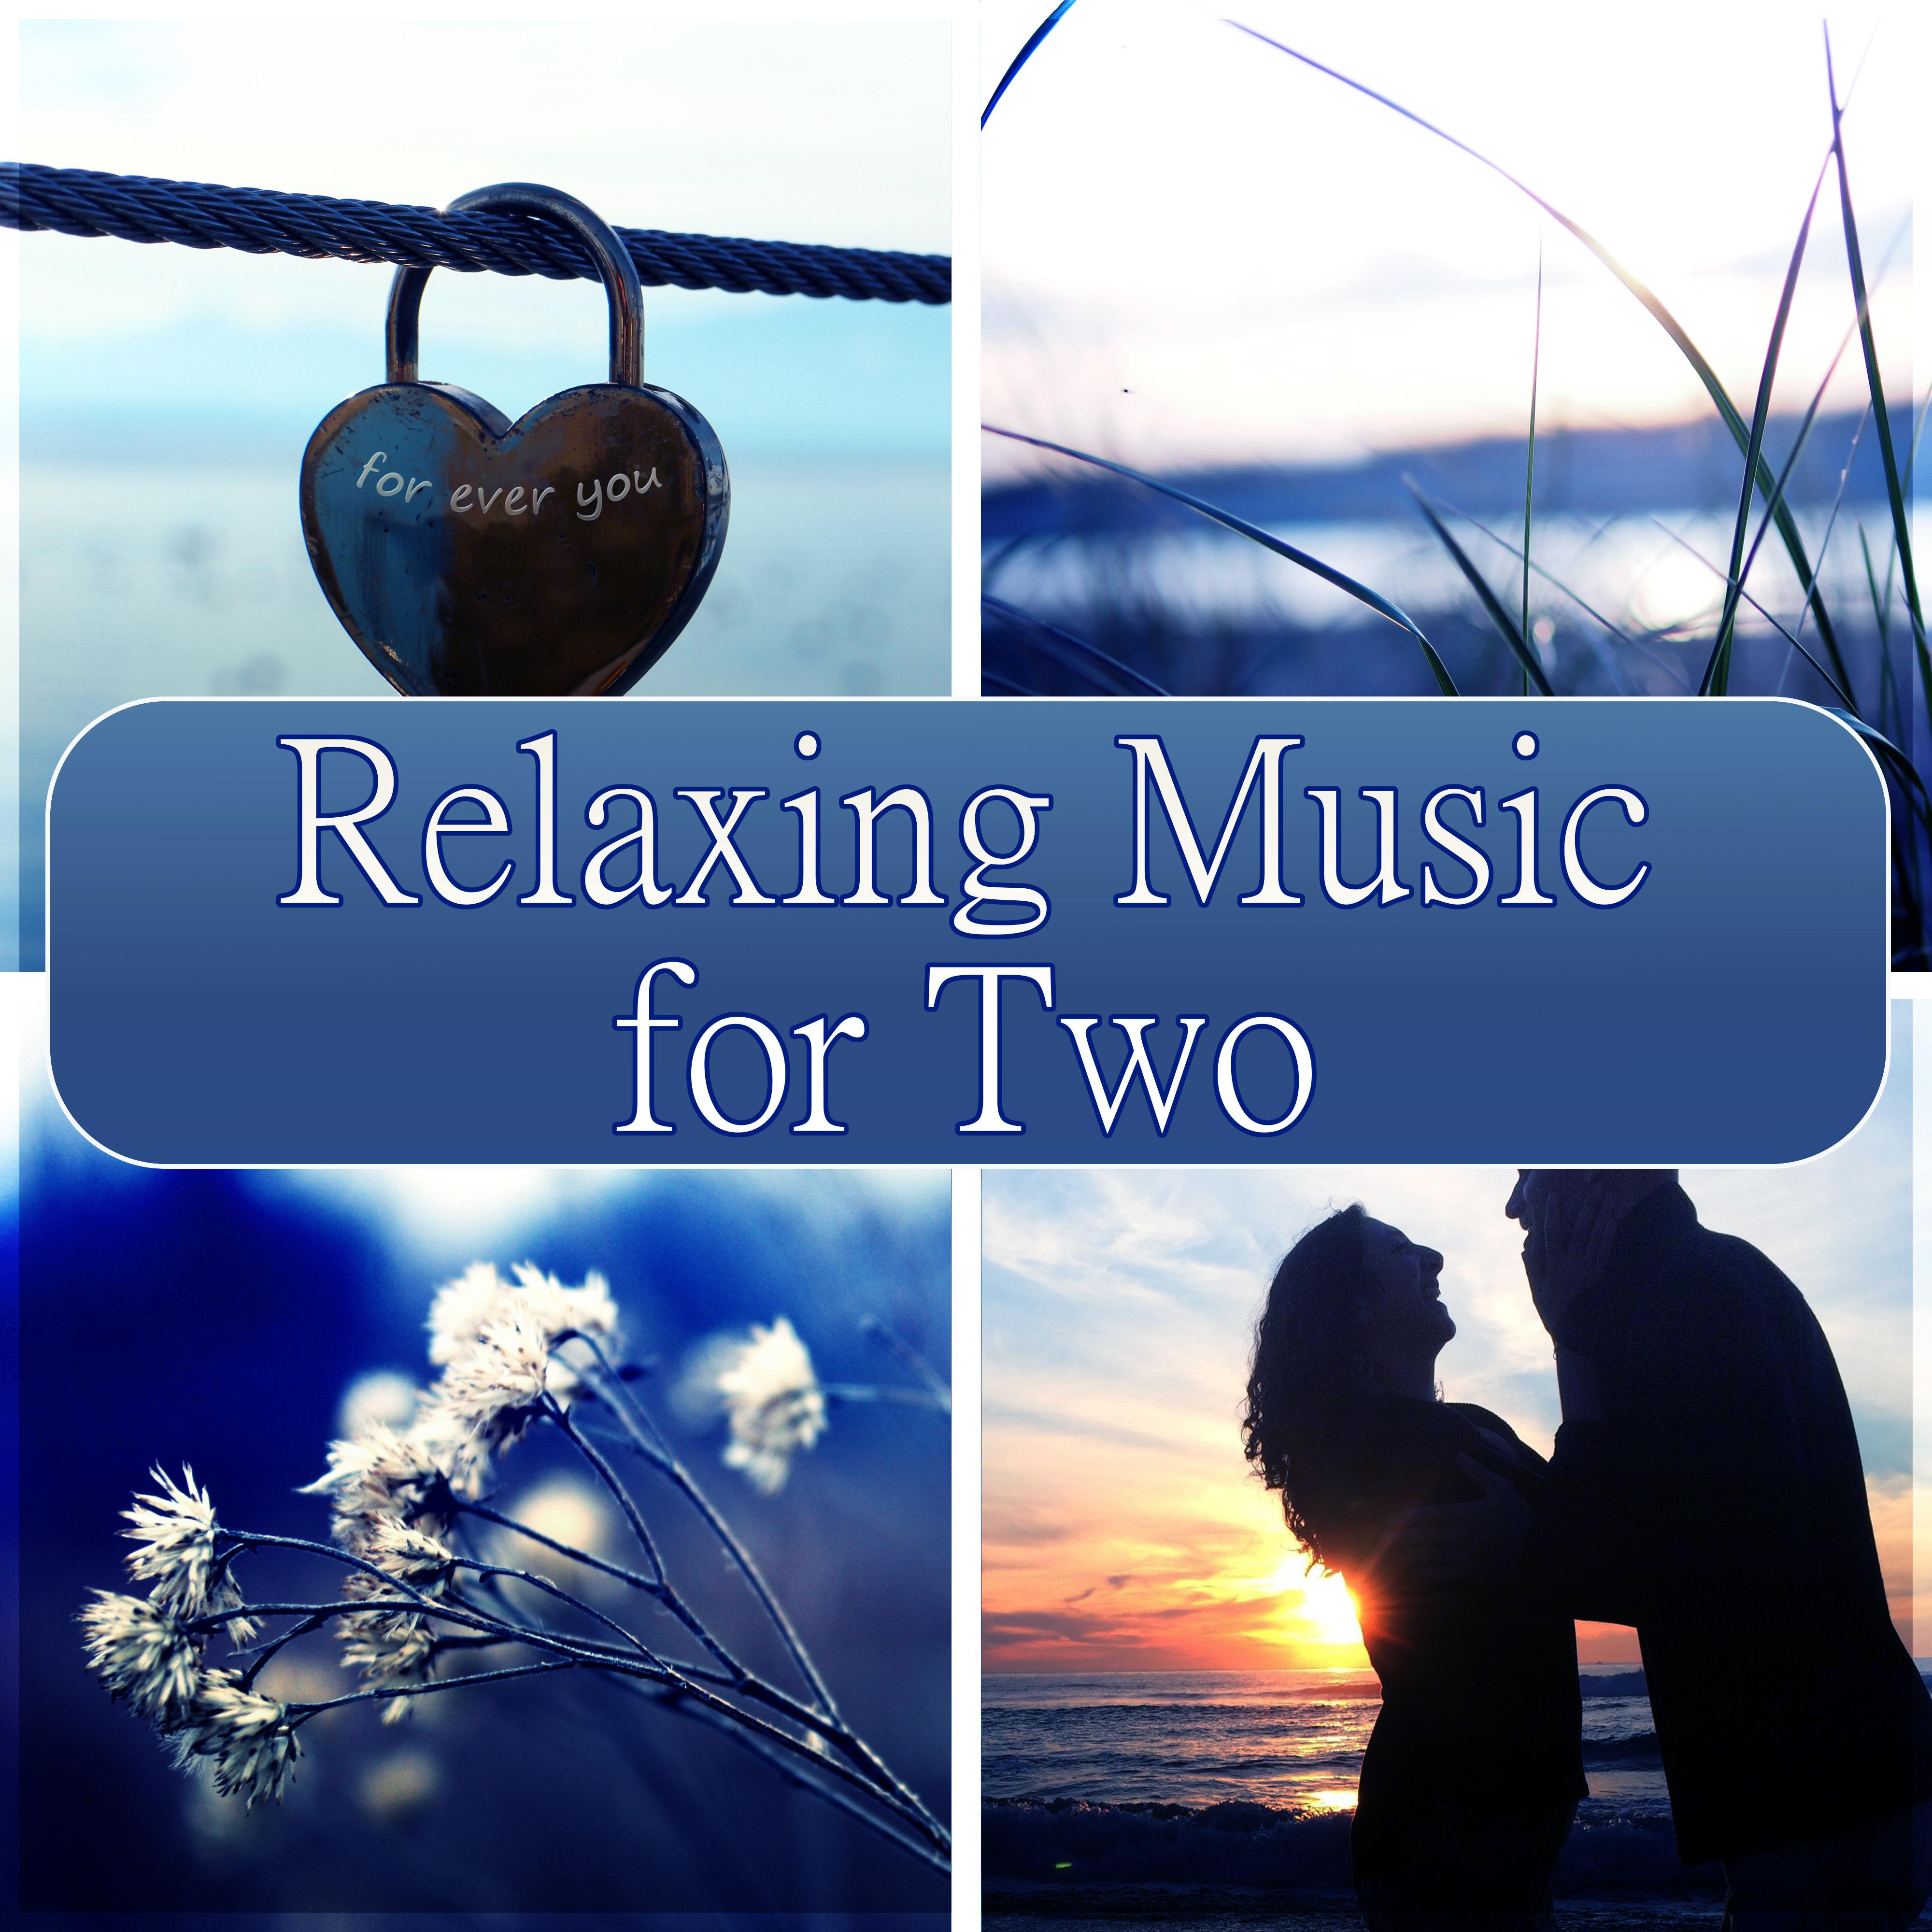 Relaxing Music for Two  Romantic Piano Music, Love Songs, Candle Light Dinner, Relaxation Music, Date Night, Proposal, Anniversary